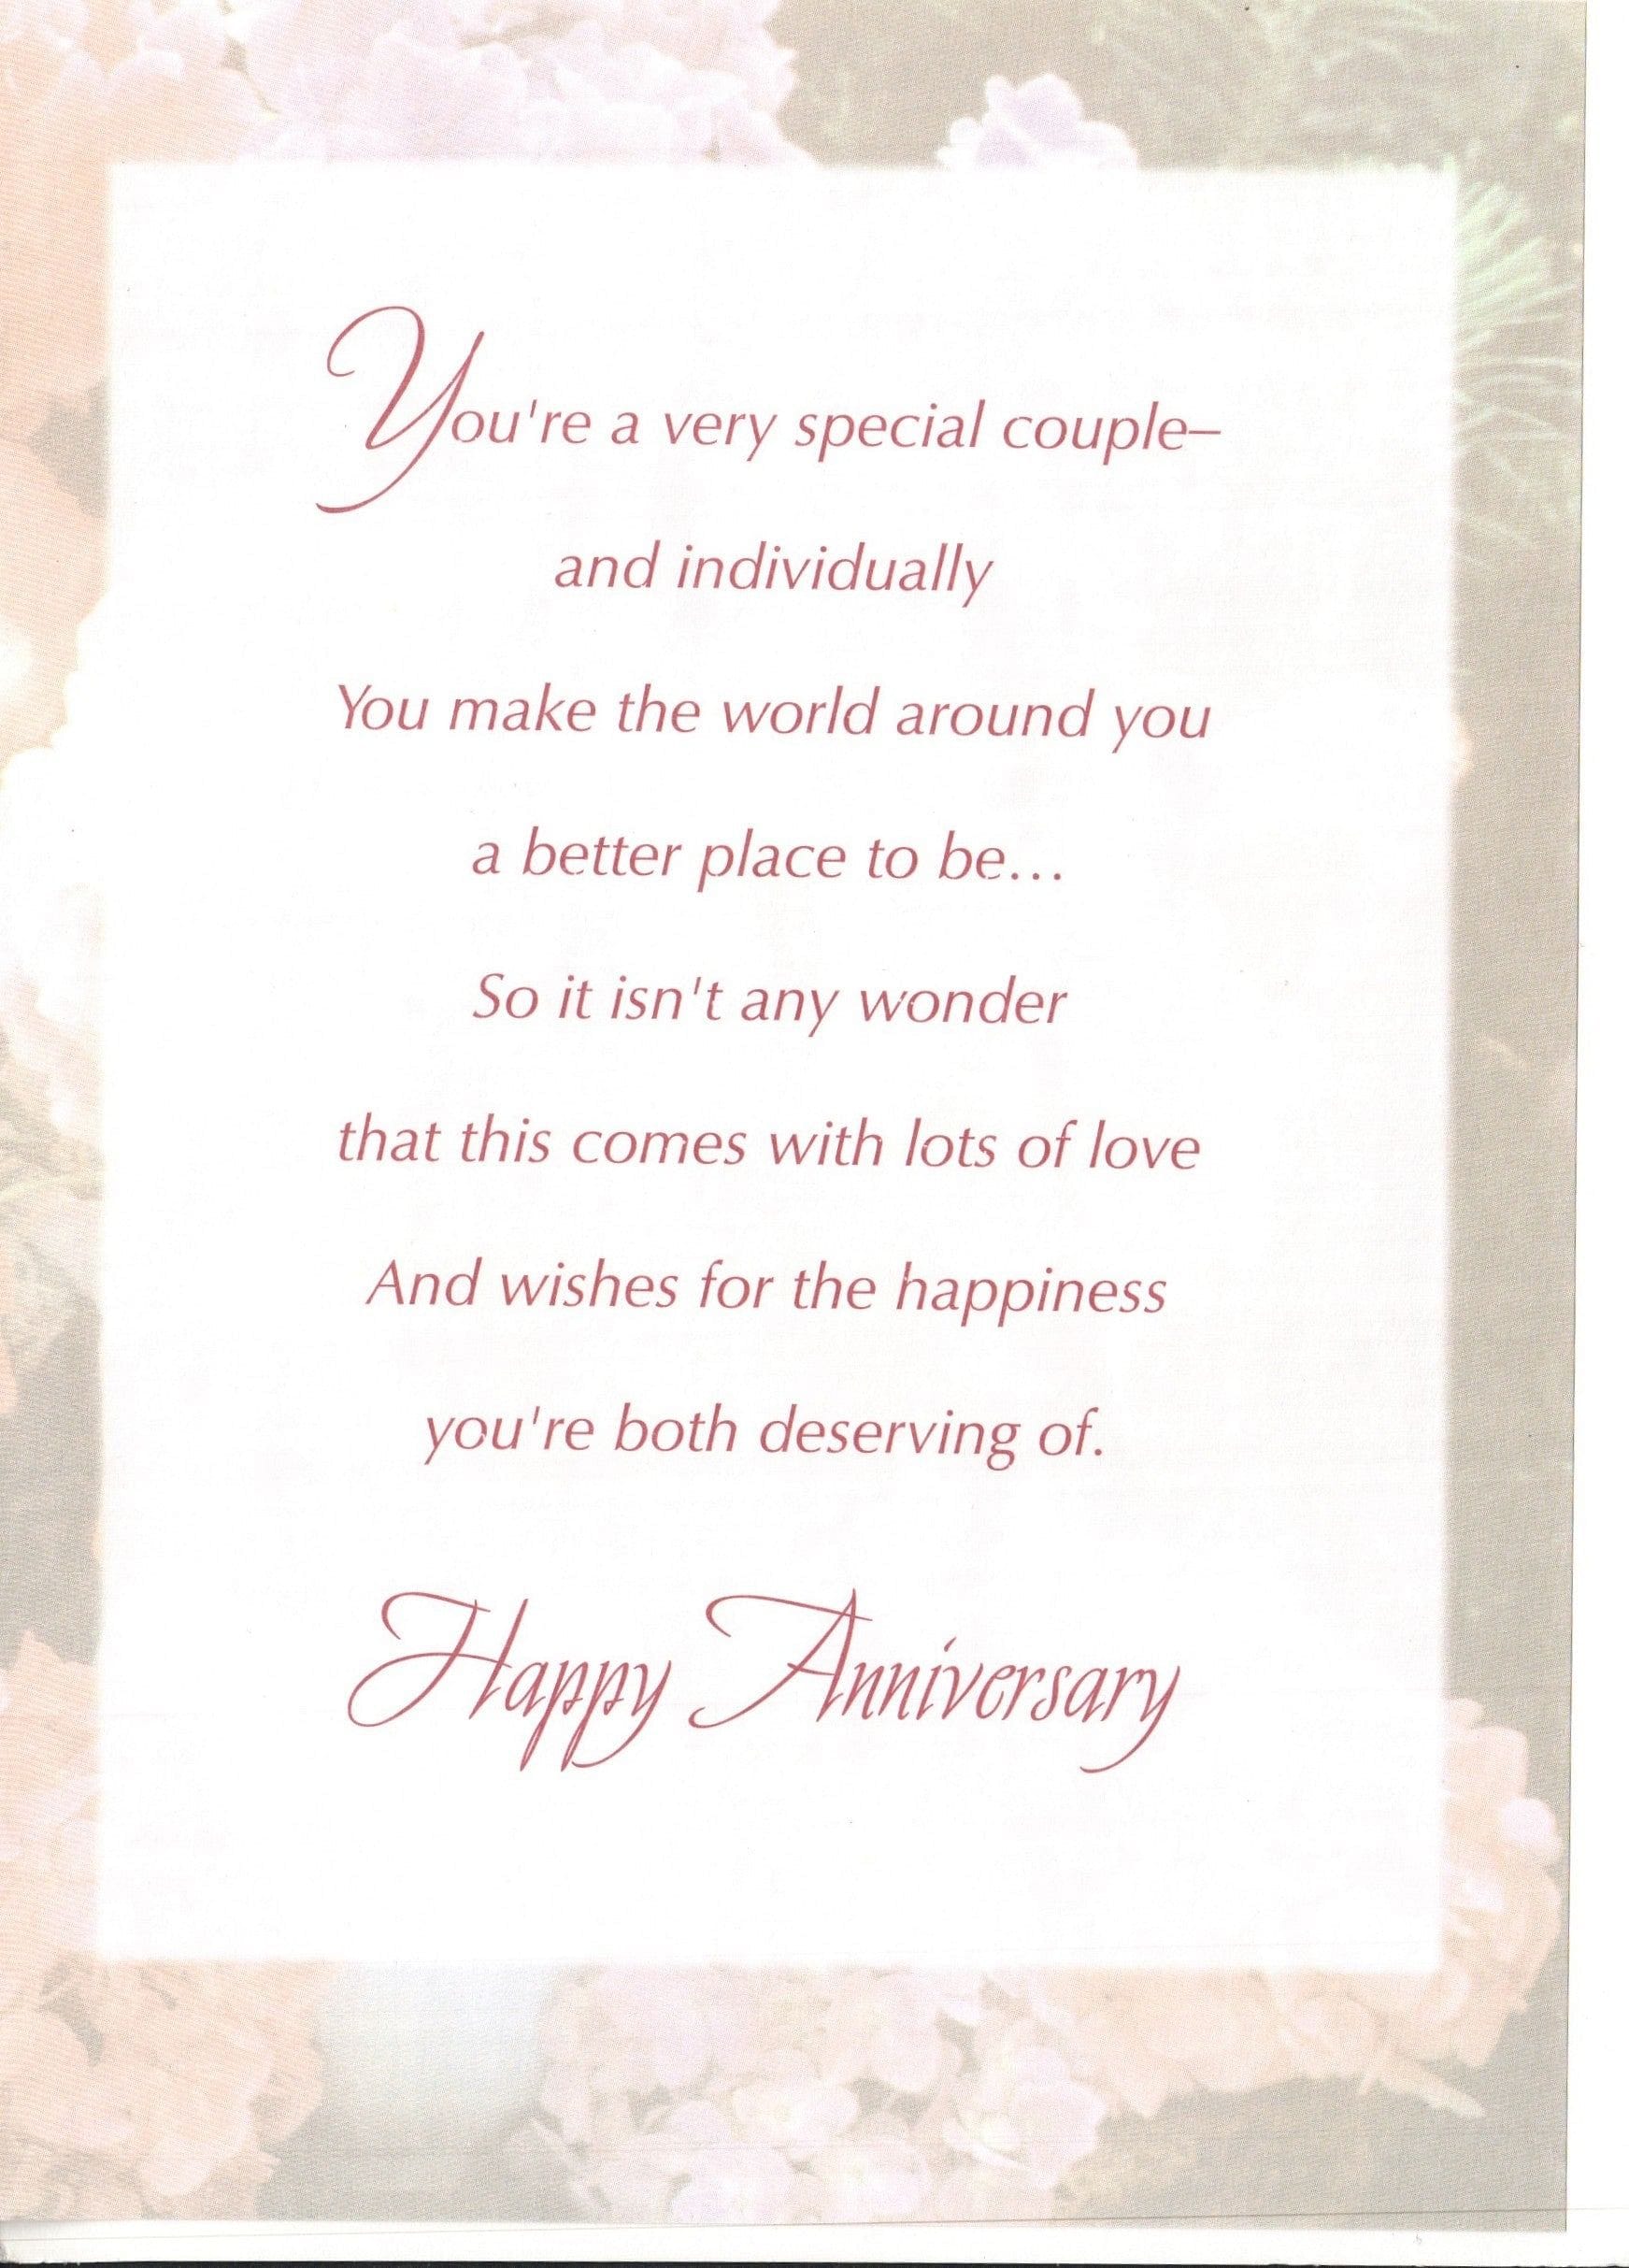 Happy Anniversary Sexy Pants! Fun Couples Card By Little Silverleaf